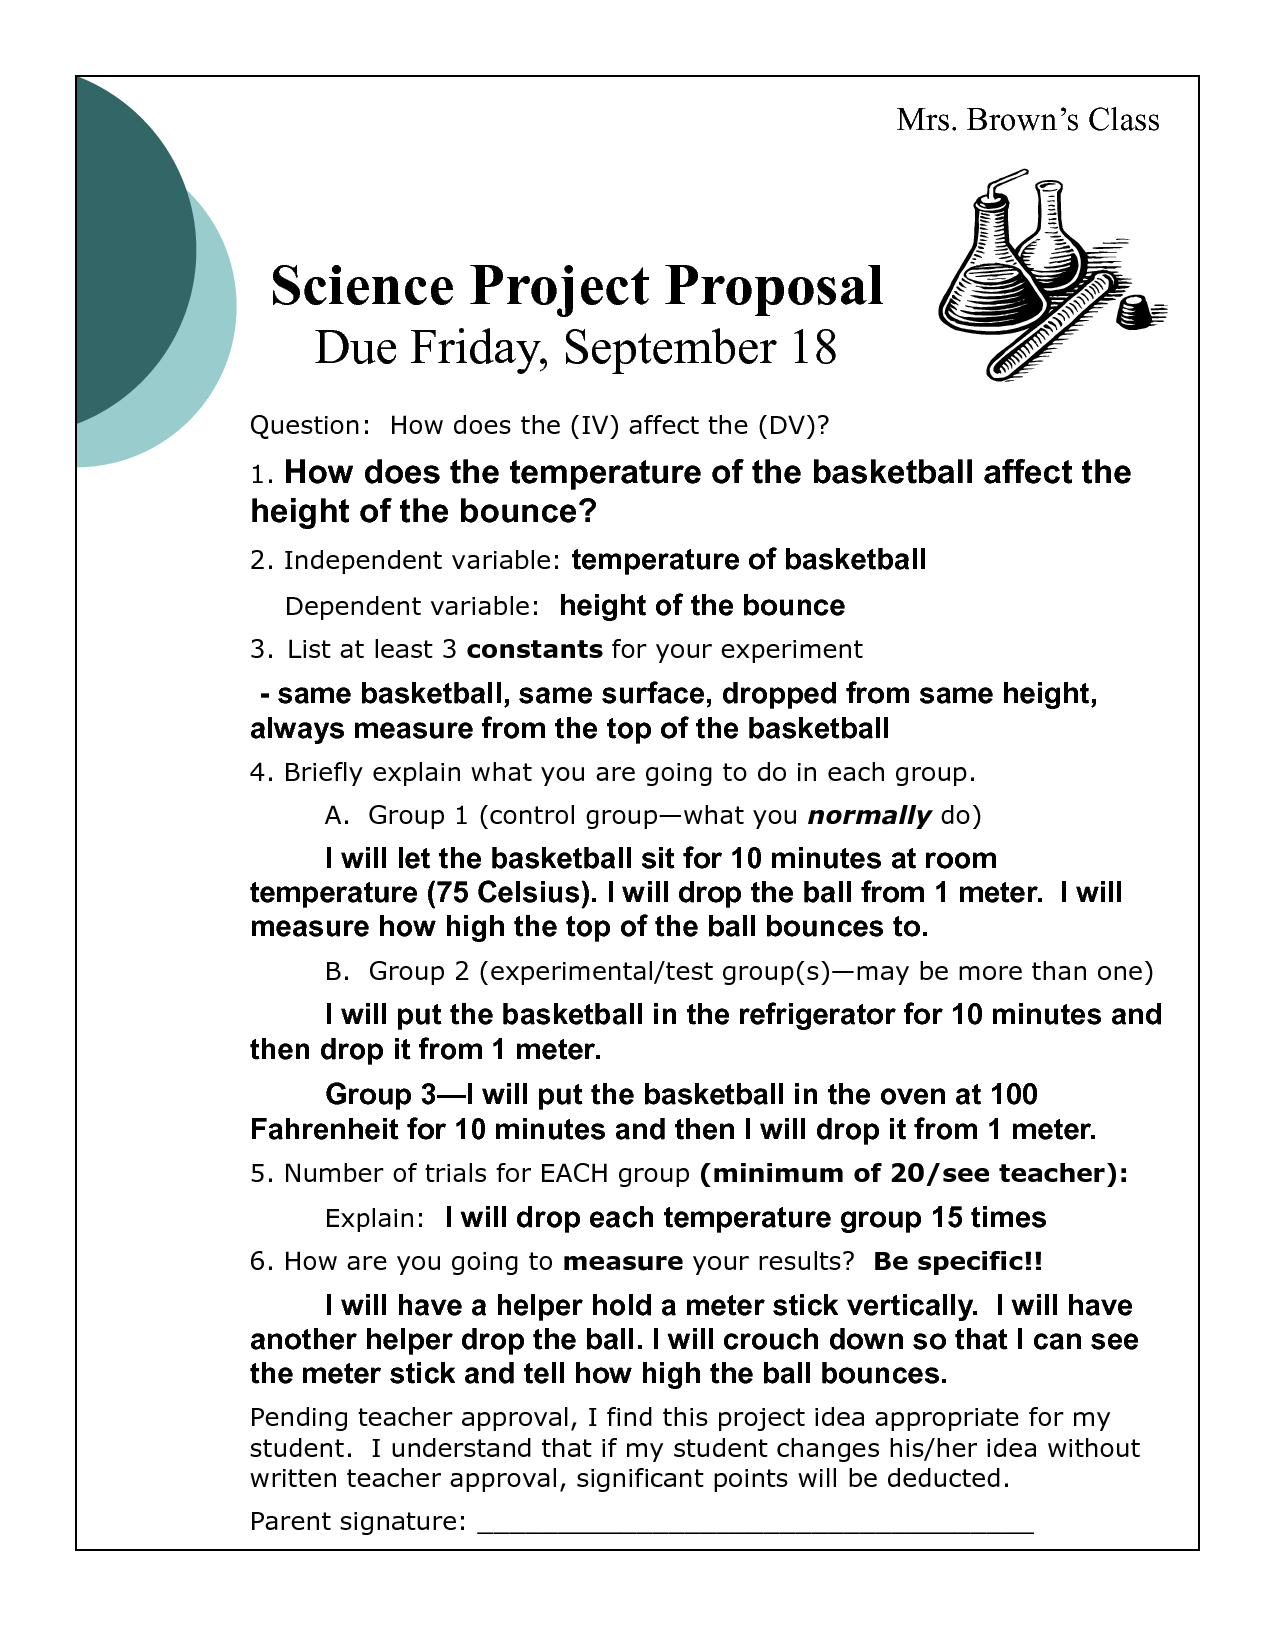 research proposals ideas science